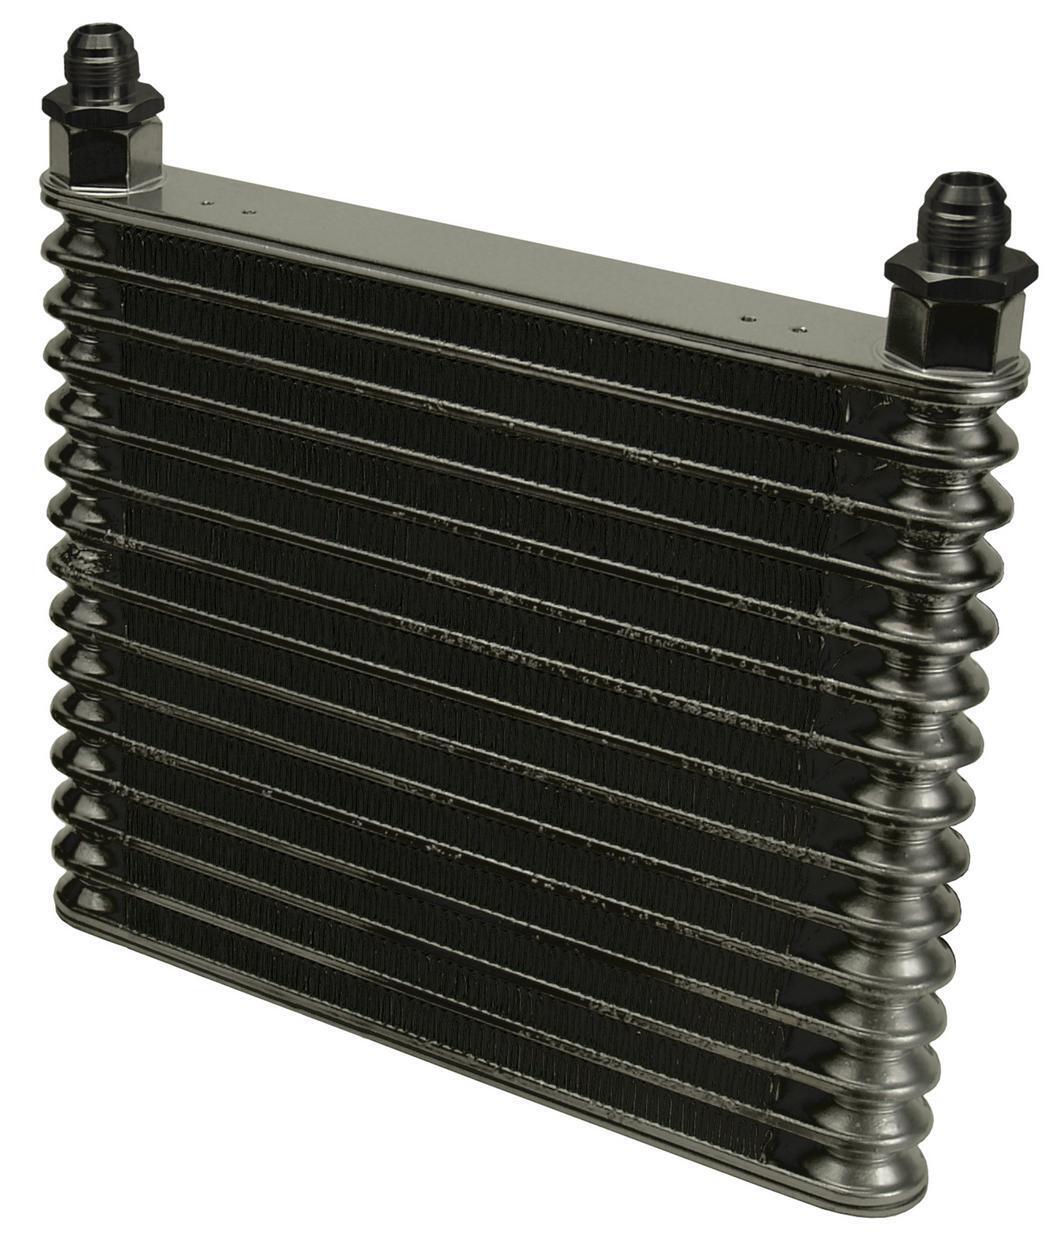 13 Row Atomic-Cool Plate & Fin Replacement Oil Cooler, -8AN Belts and Cooling En